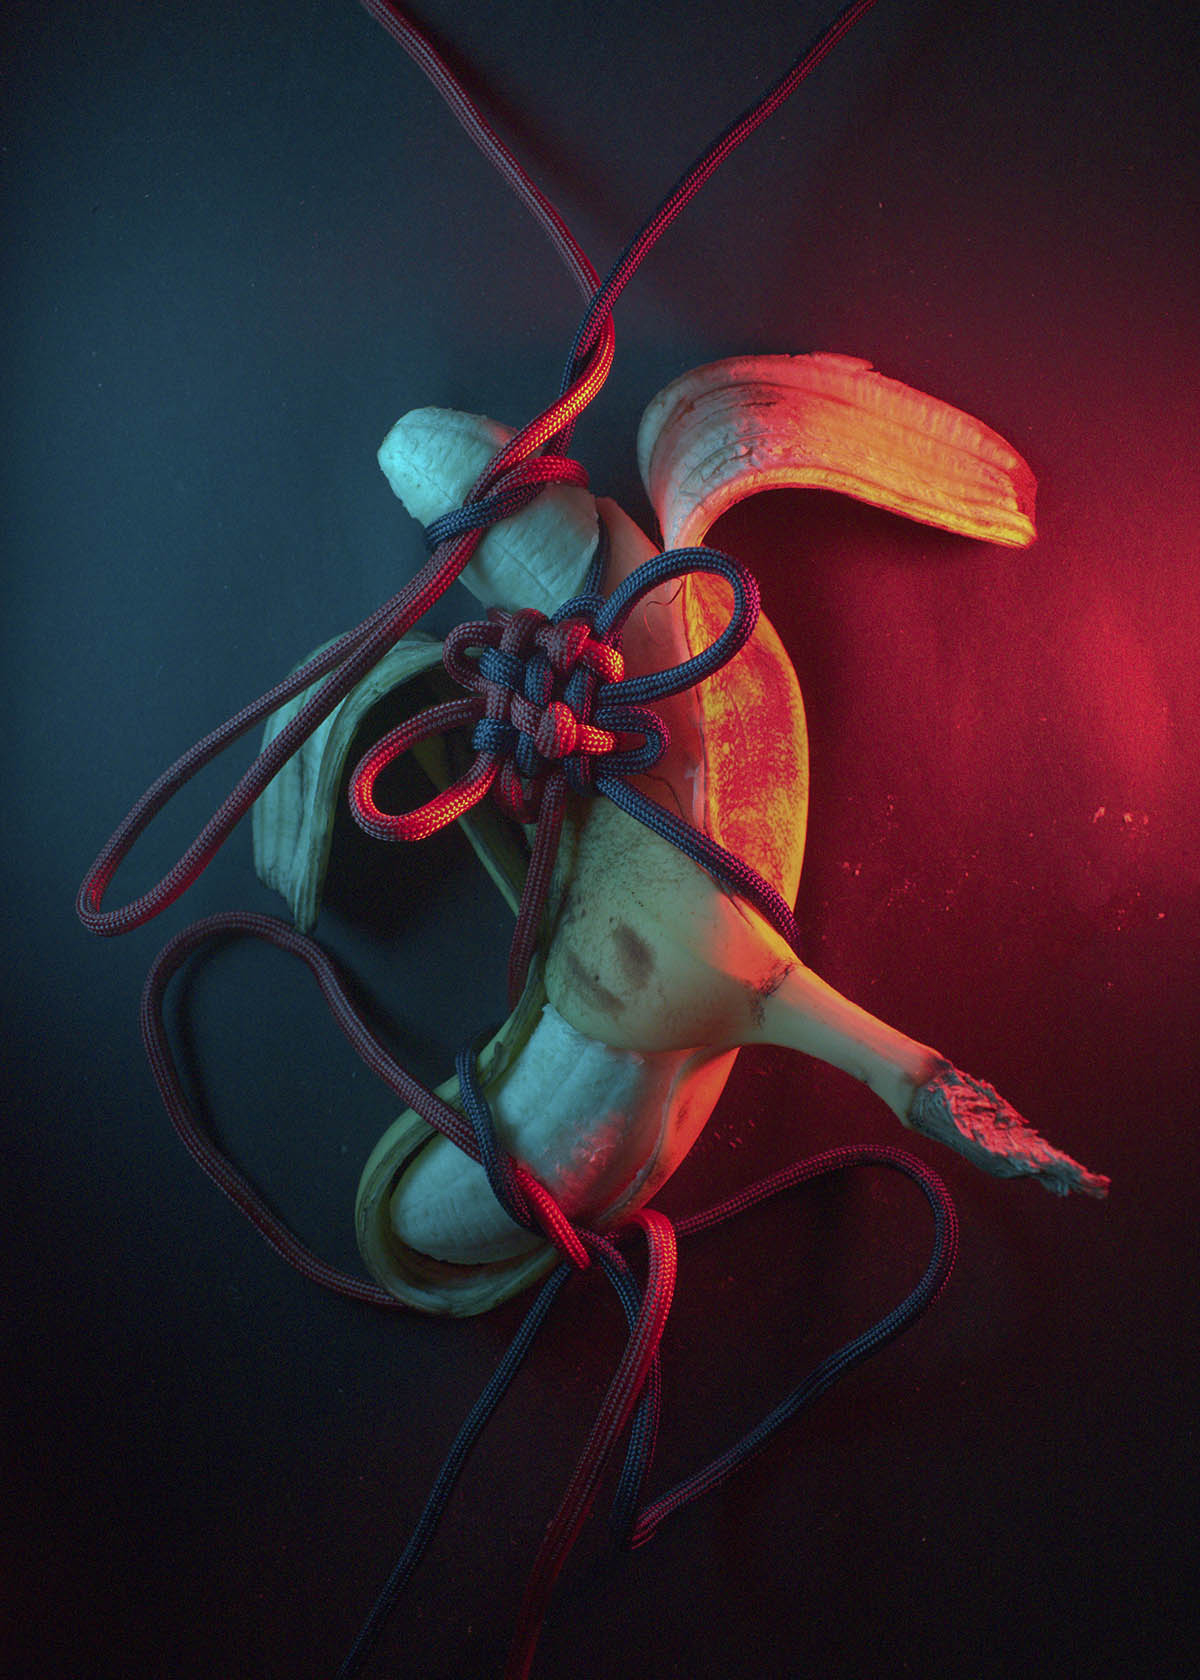 A peeled banana with the peel laying over the banana and encasing it, with red and blue rope tying the banana skin to the flesh, other knots digging into the flesh and a decorative knot at the centre. This is on top of a black background and lit with red and blue light.